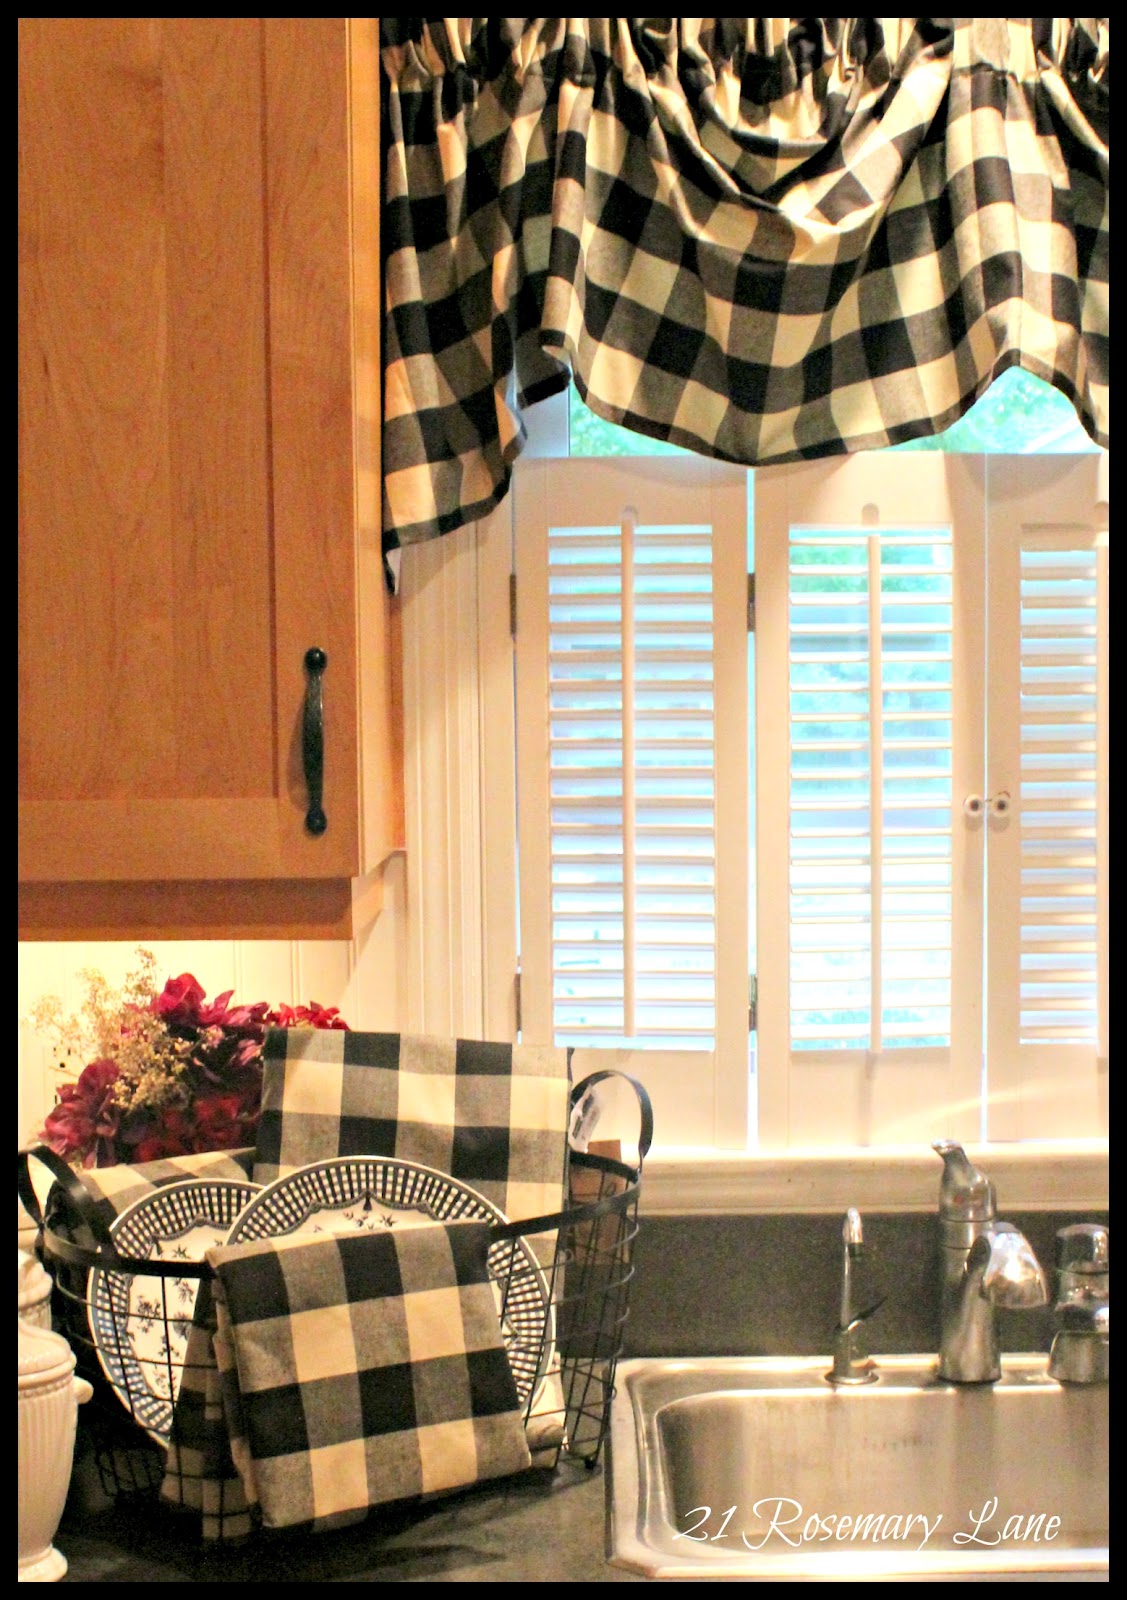 21 Rosemary Lane: A Few New Items for My Kitchen ~ Black and White